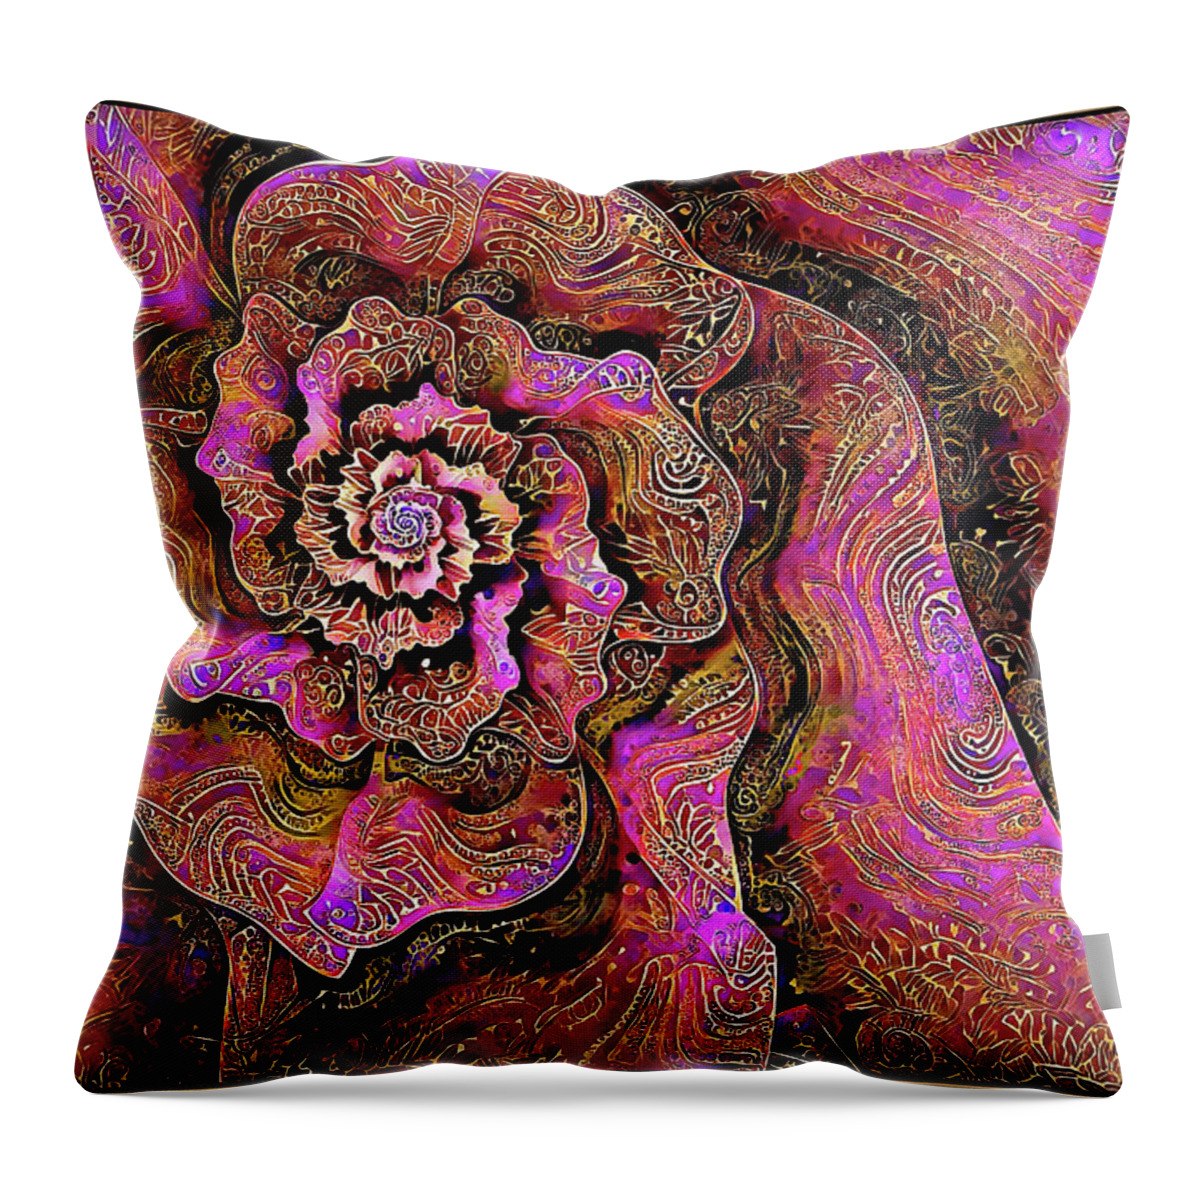 Golden Rose Throw Pillow featuring the digital art Golden Rose by Missy Gainer